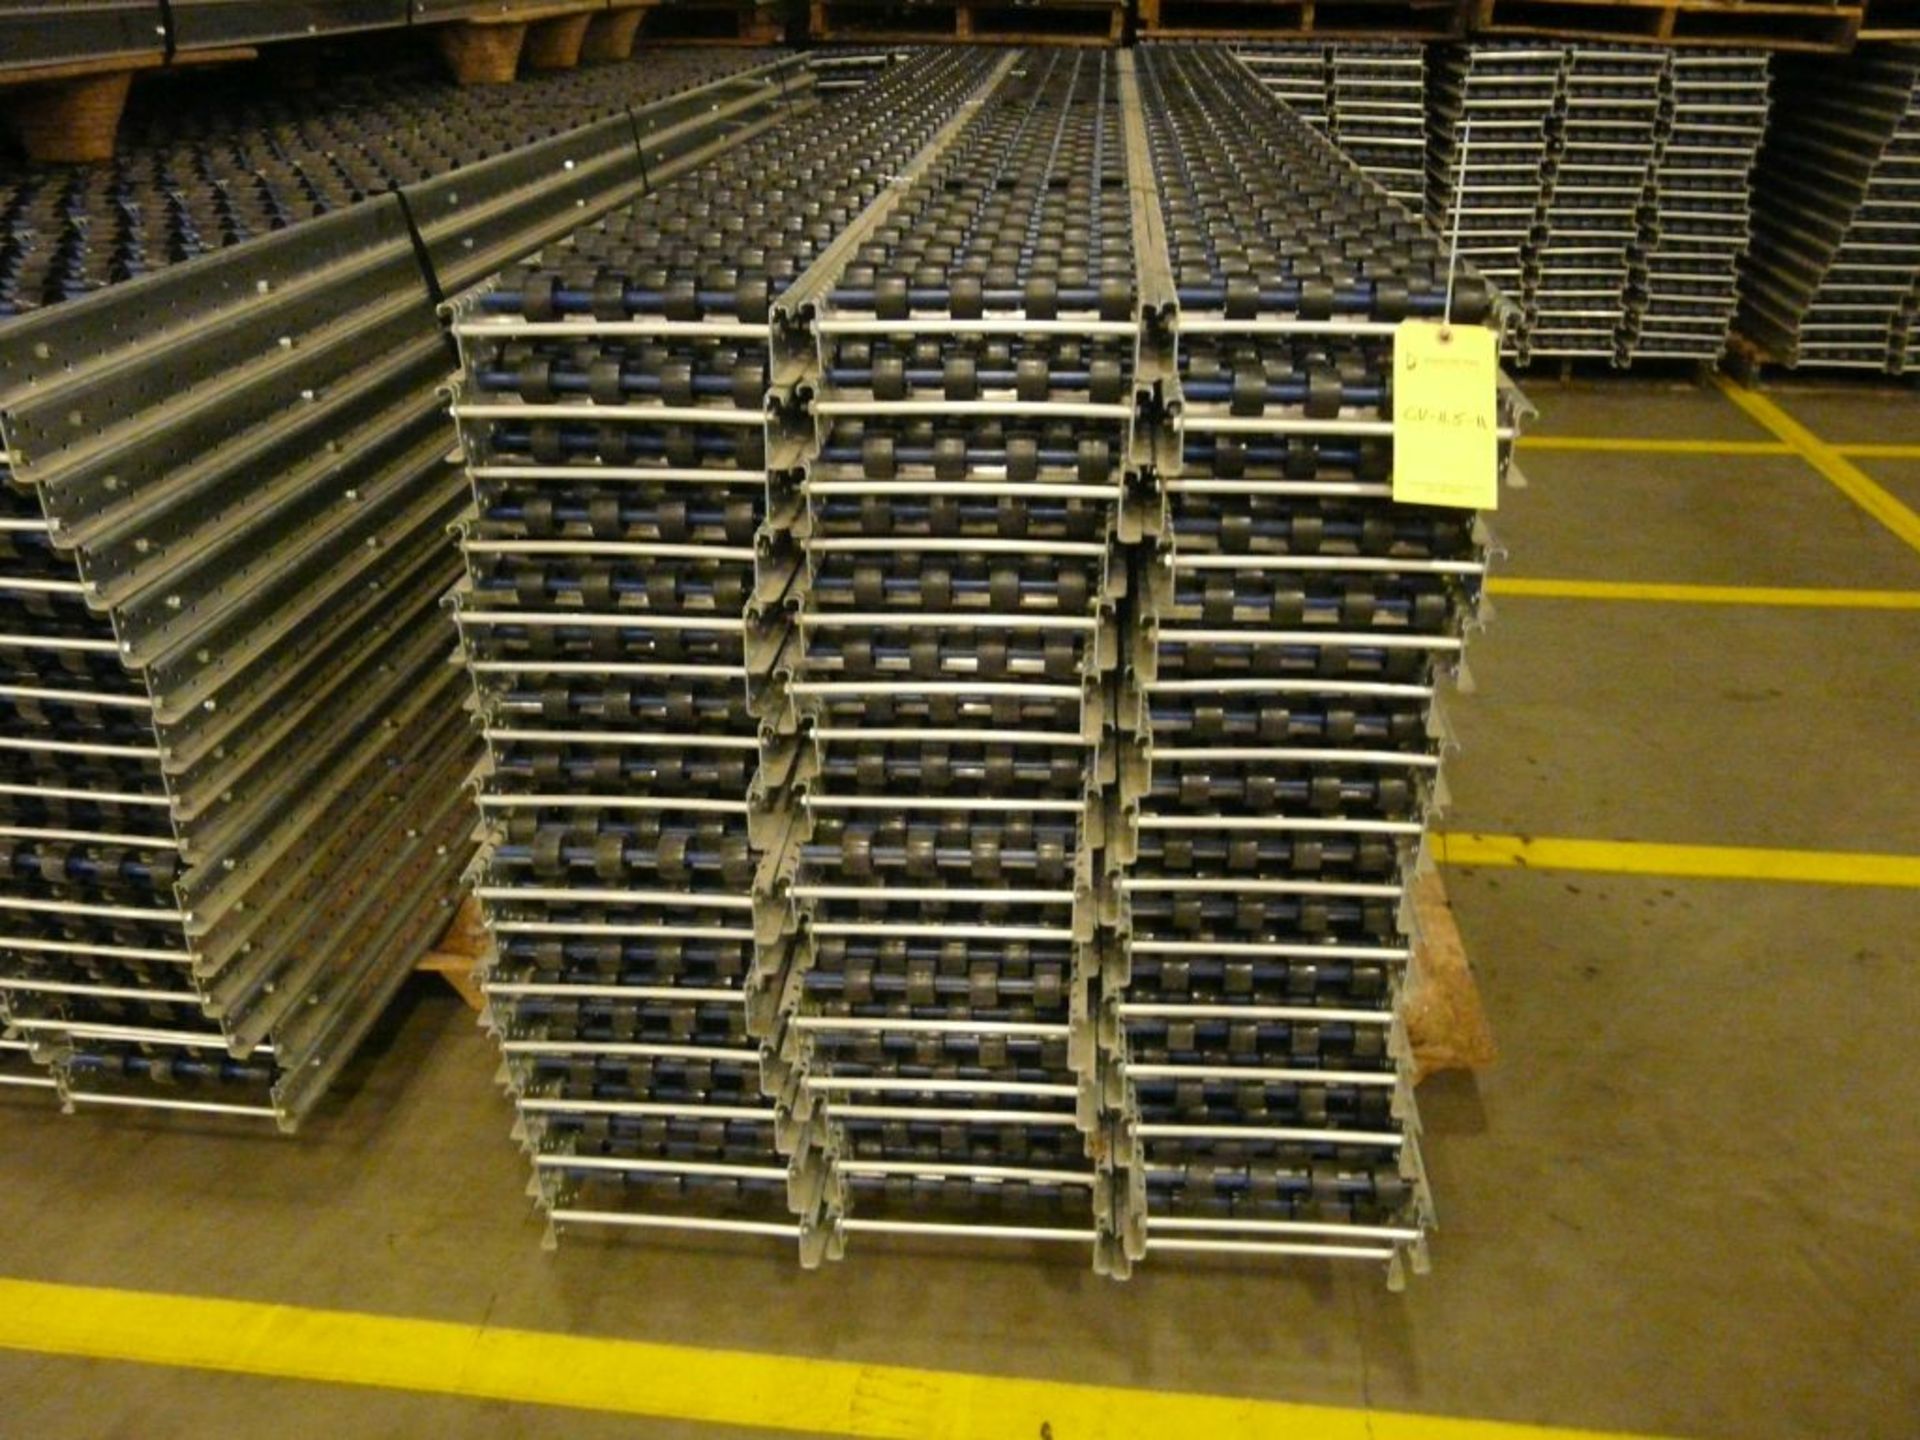 Lot of (90) SpanTrack Wheelbed Carton Flow Conveyors - 11.5'L x 11"W; Tag: 223614 - $30 Lot - Image 2 of 4